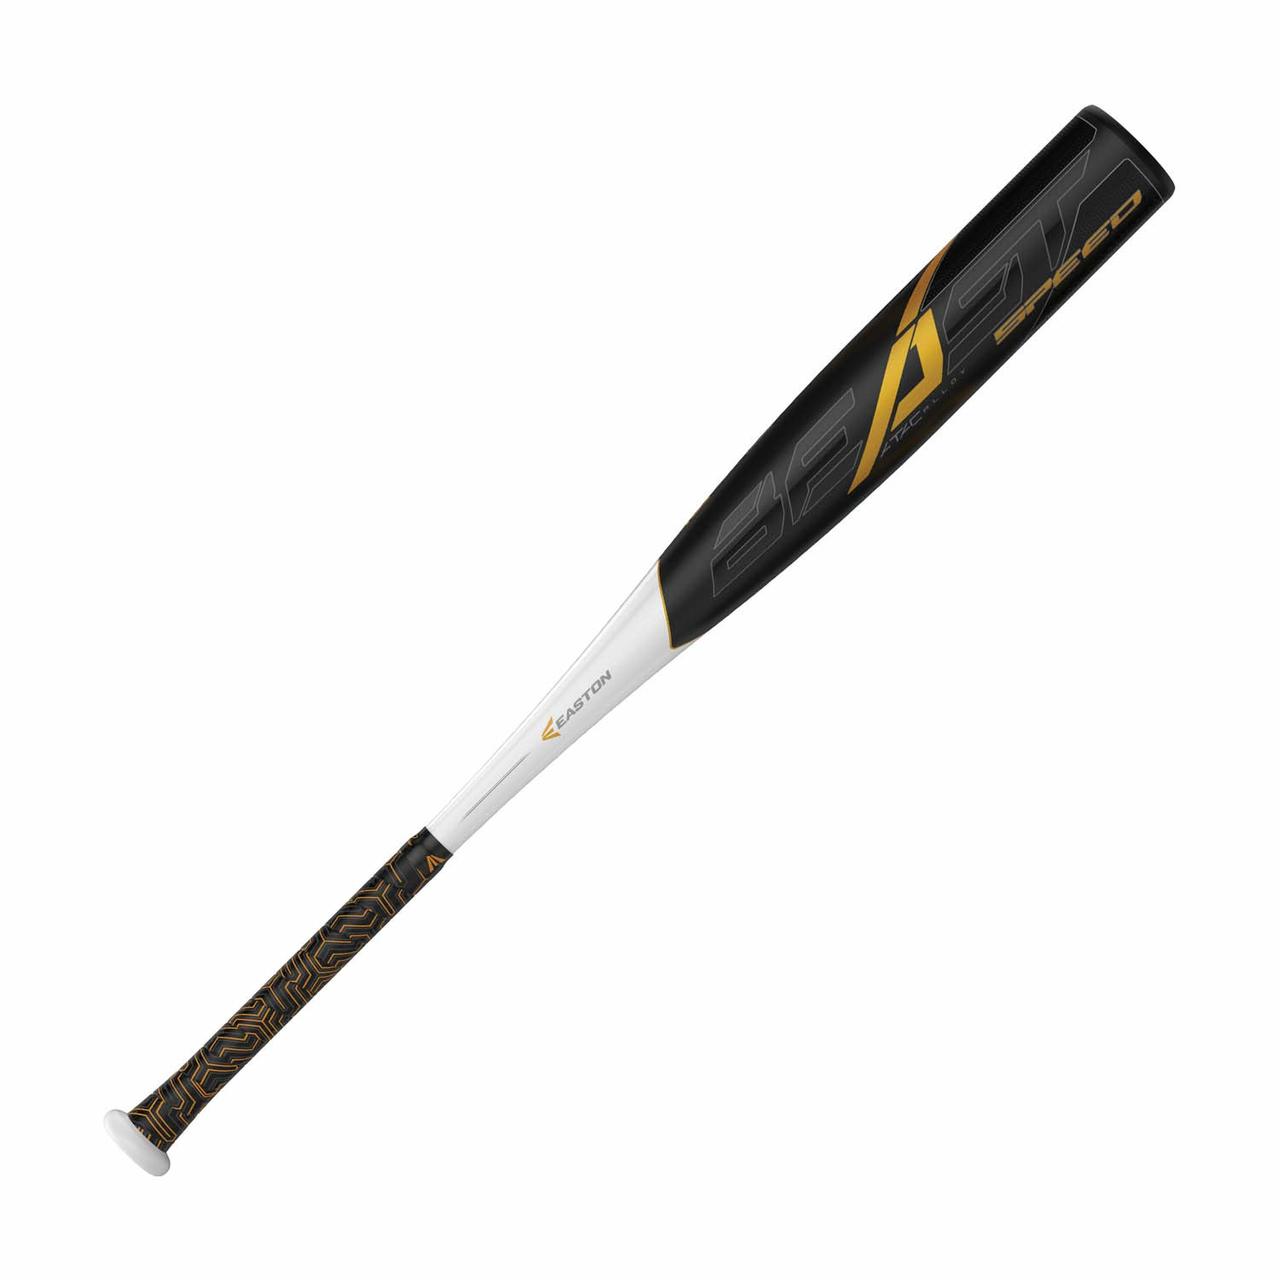 easton-beast-speed-usssa-baseball-bat-30-in-20-oz-sl19bs10 SL19BS10-3020 Easton 628412233863 ATAC Alloy –Advanced Thermal Alloy Construction provides the lightest and strongest